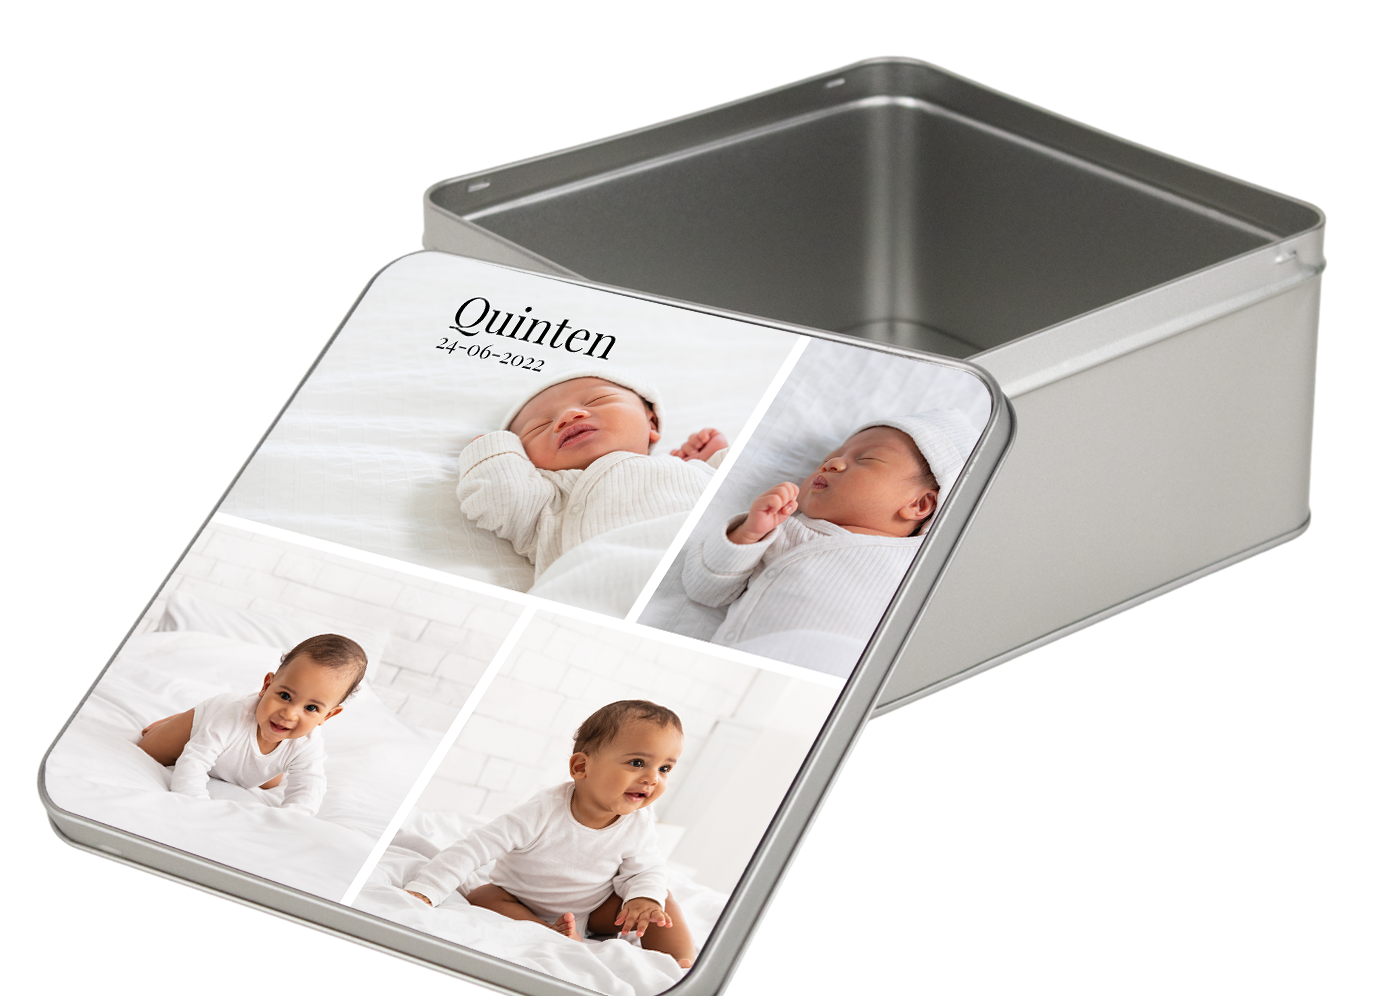 Personalize your own cookie tin box with picture and text